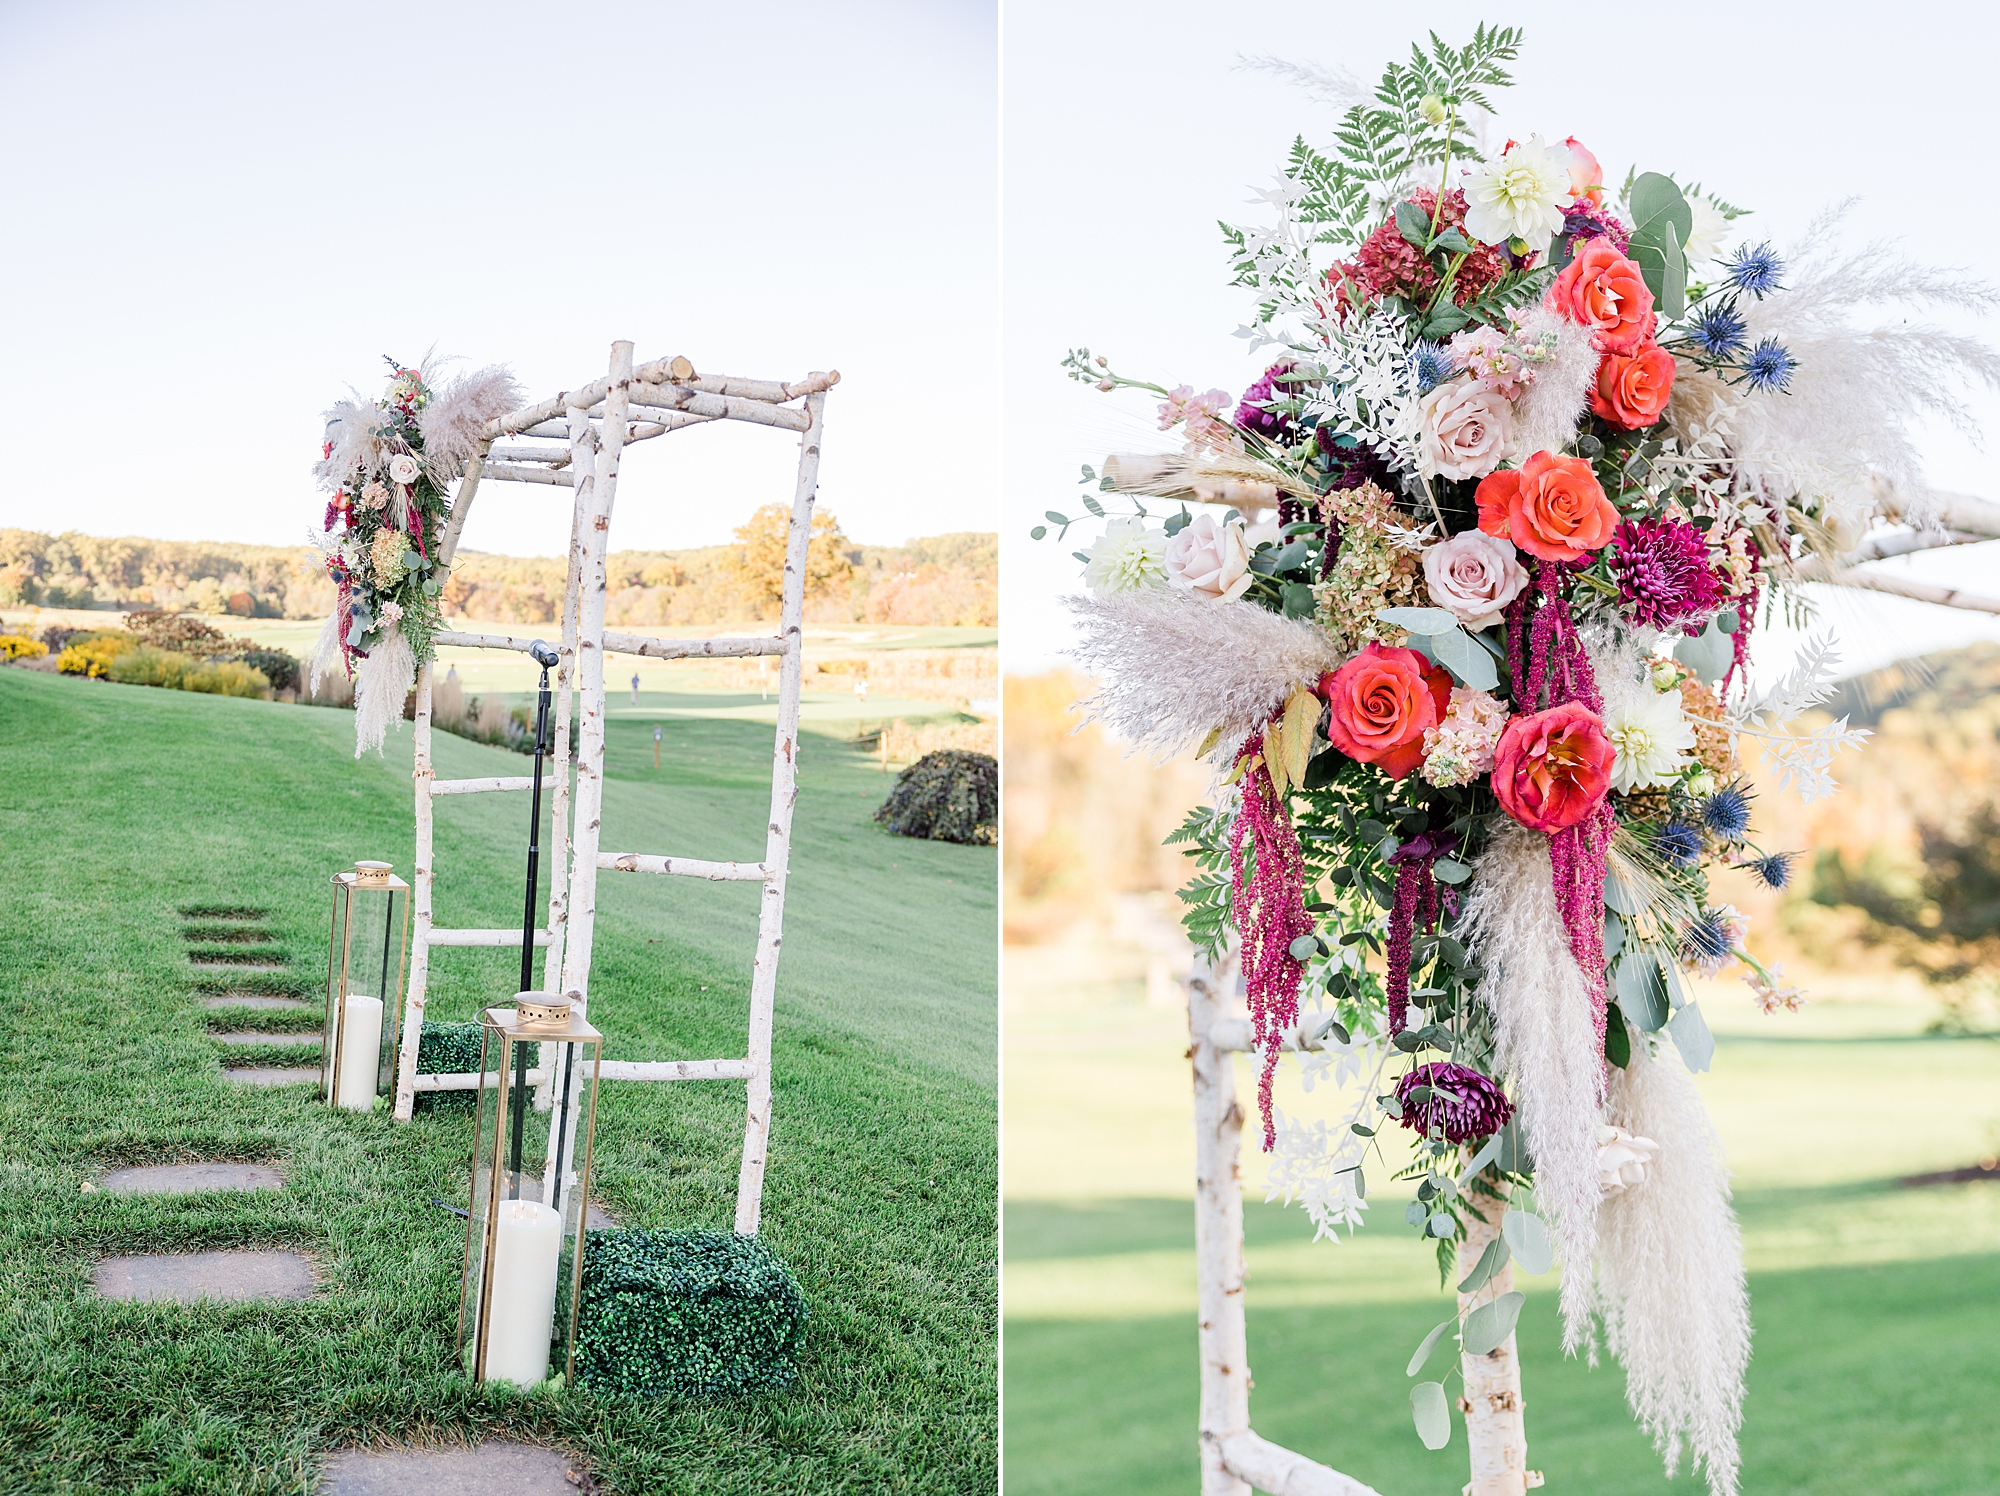 flowers on wedding arch at outdoor ceremony